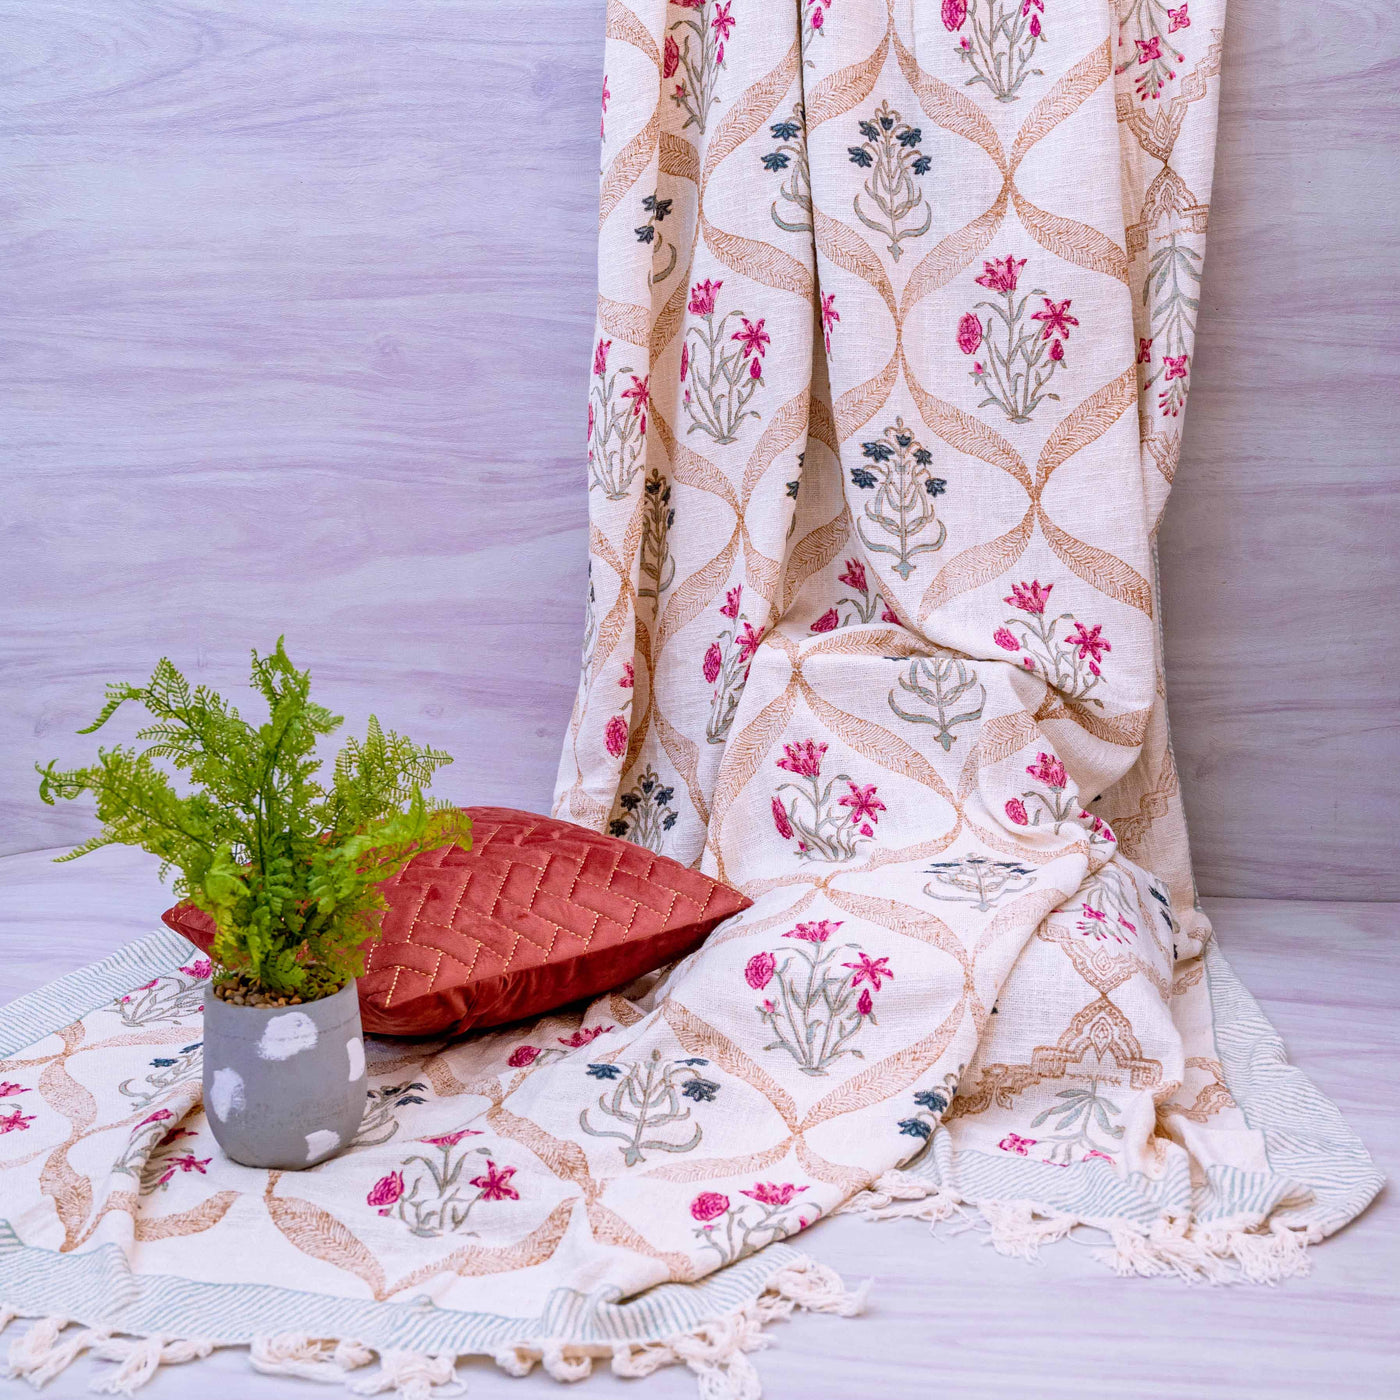 Floral handloom throws by Home 360